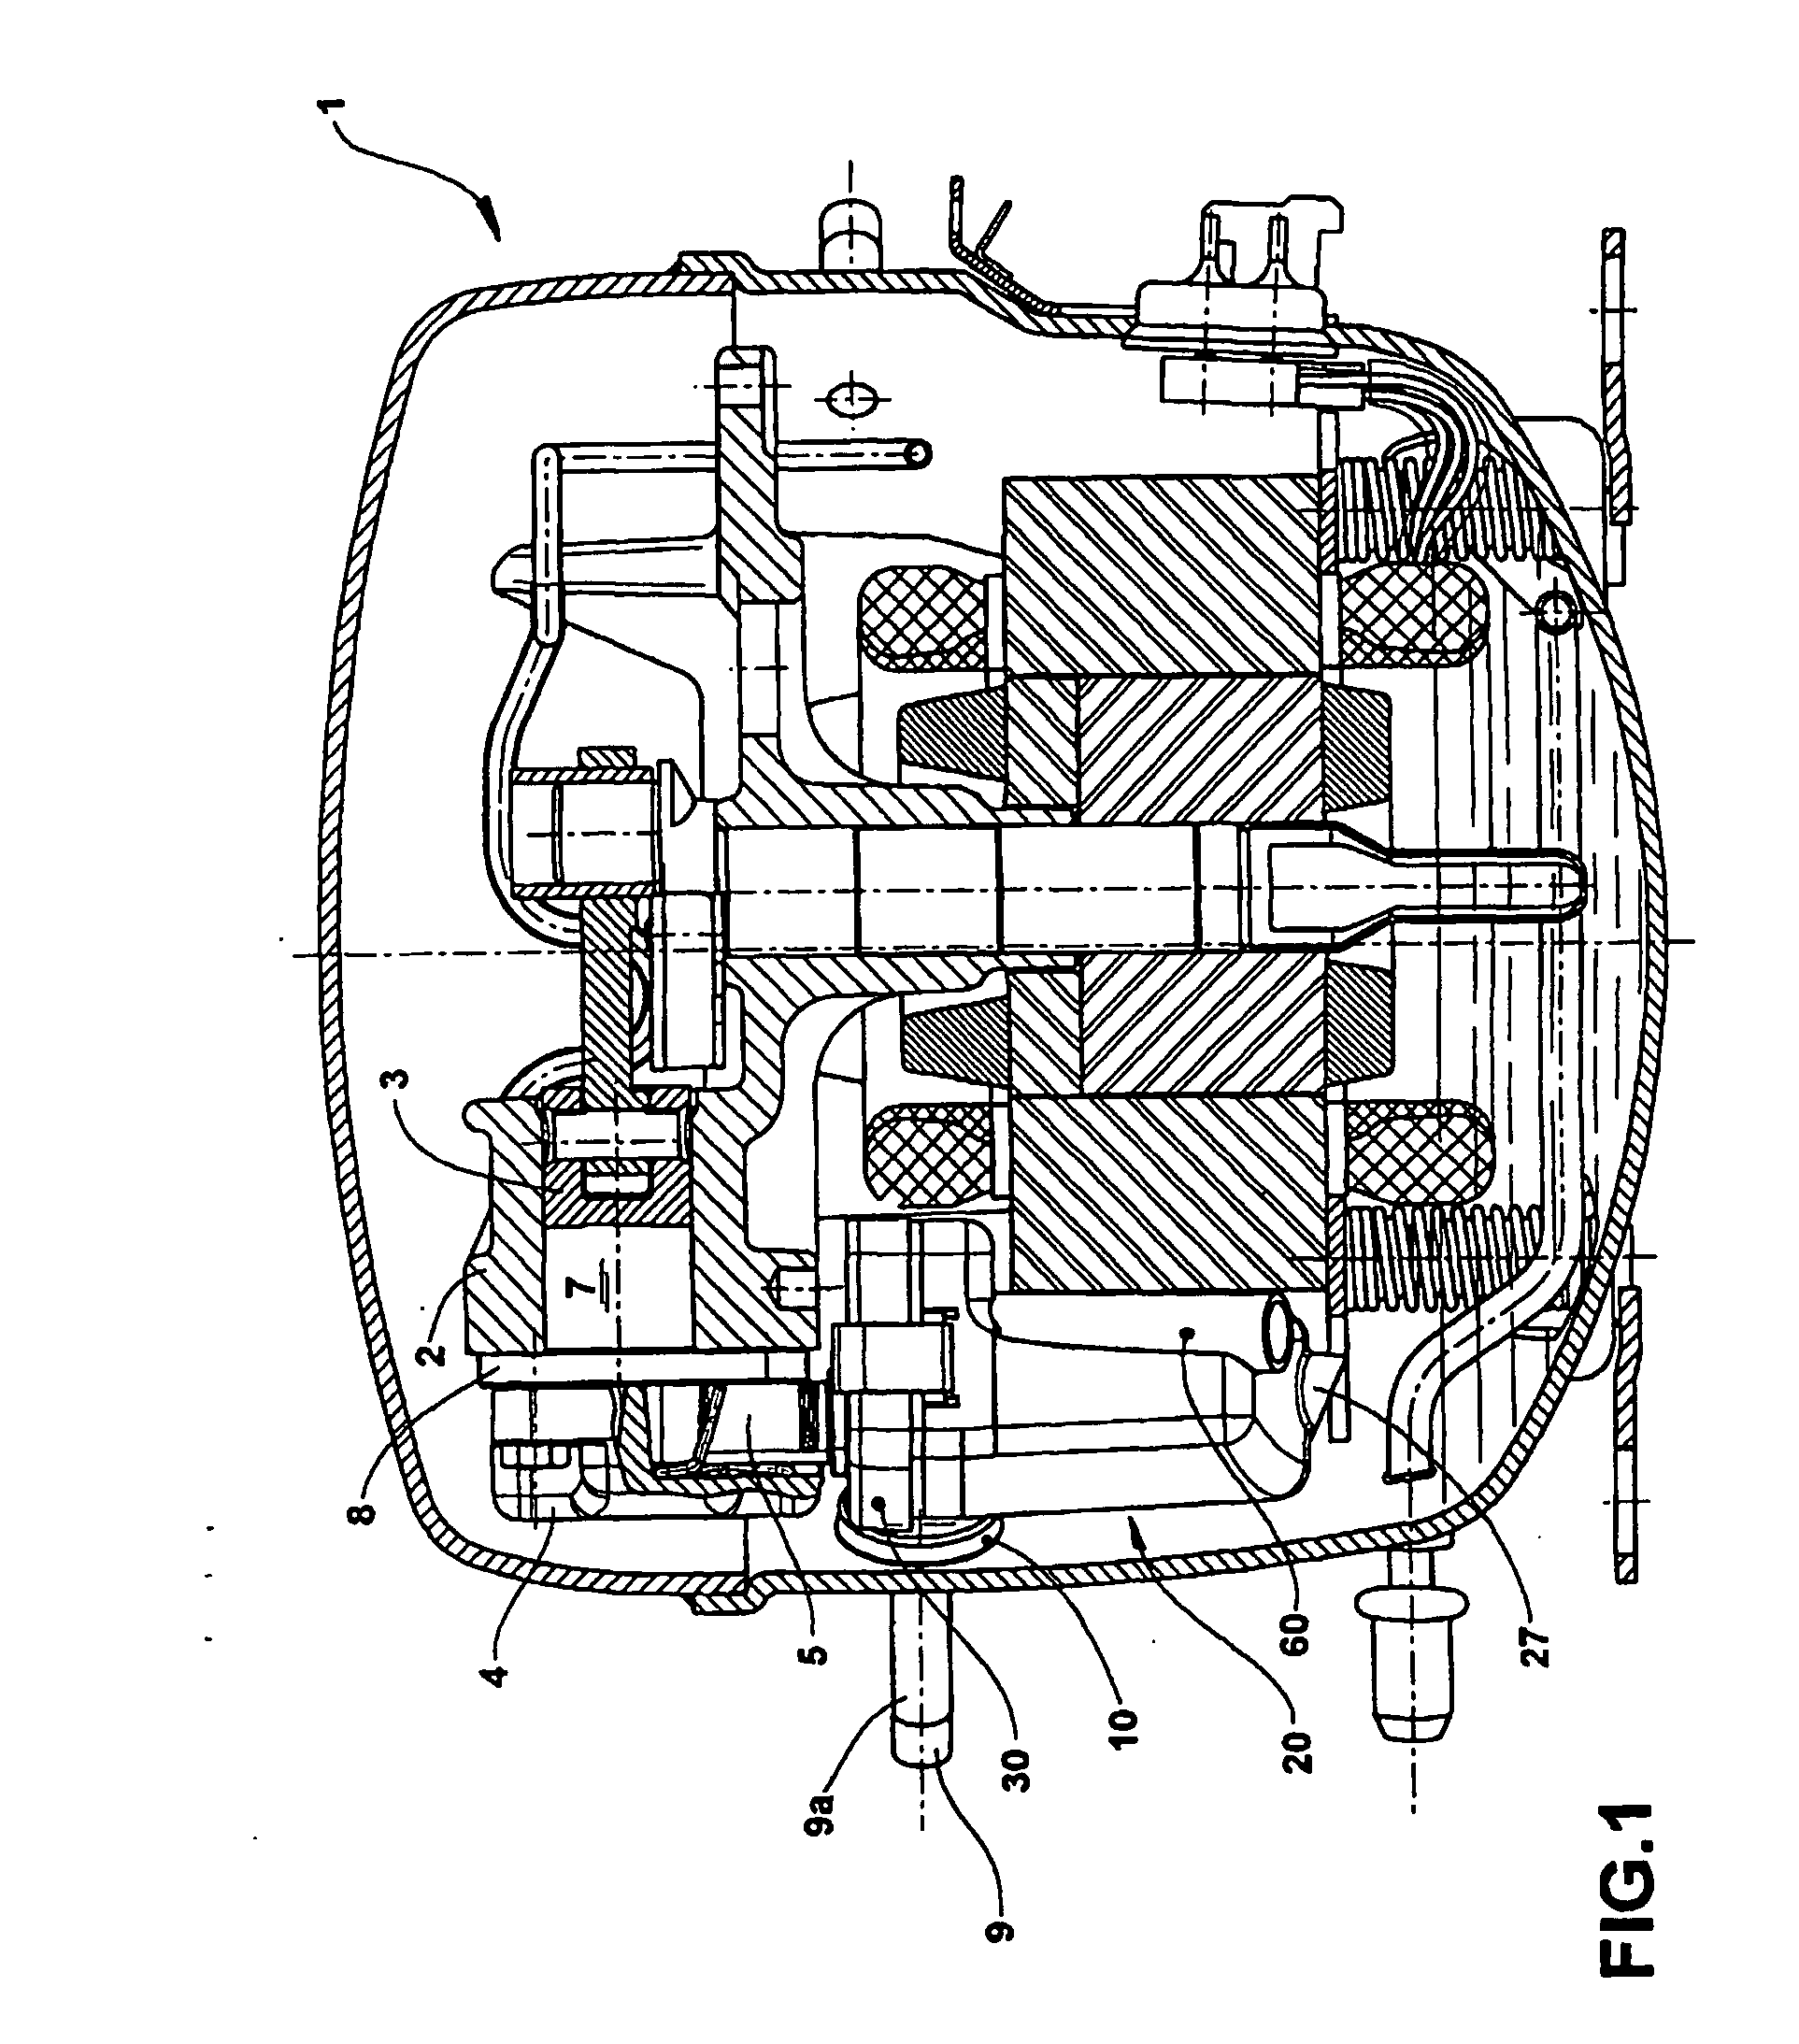 Suction muffler for a reciprocating hermetic compressor